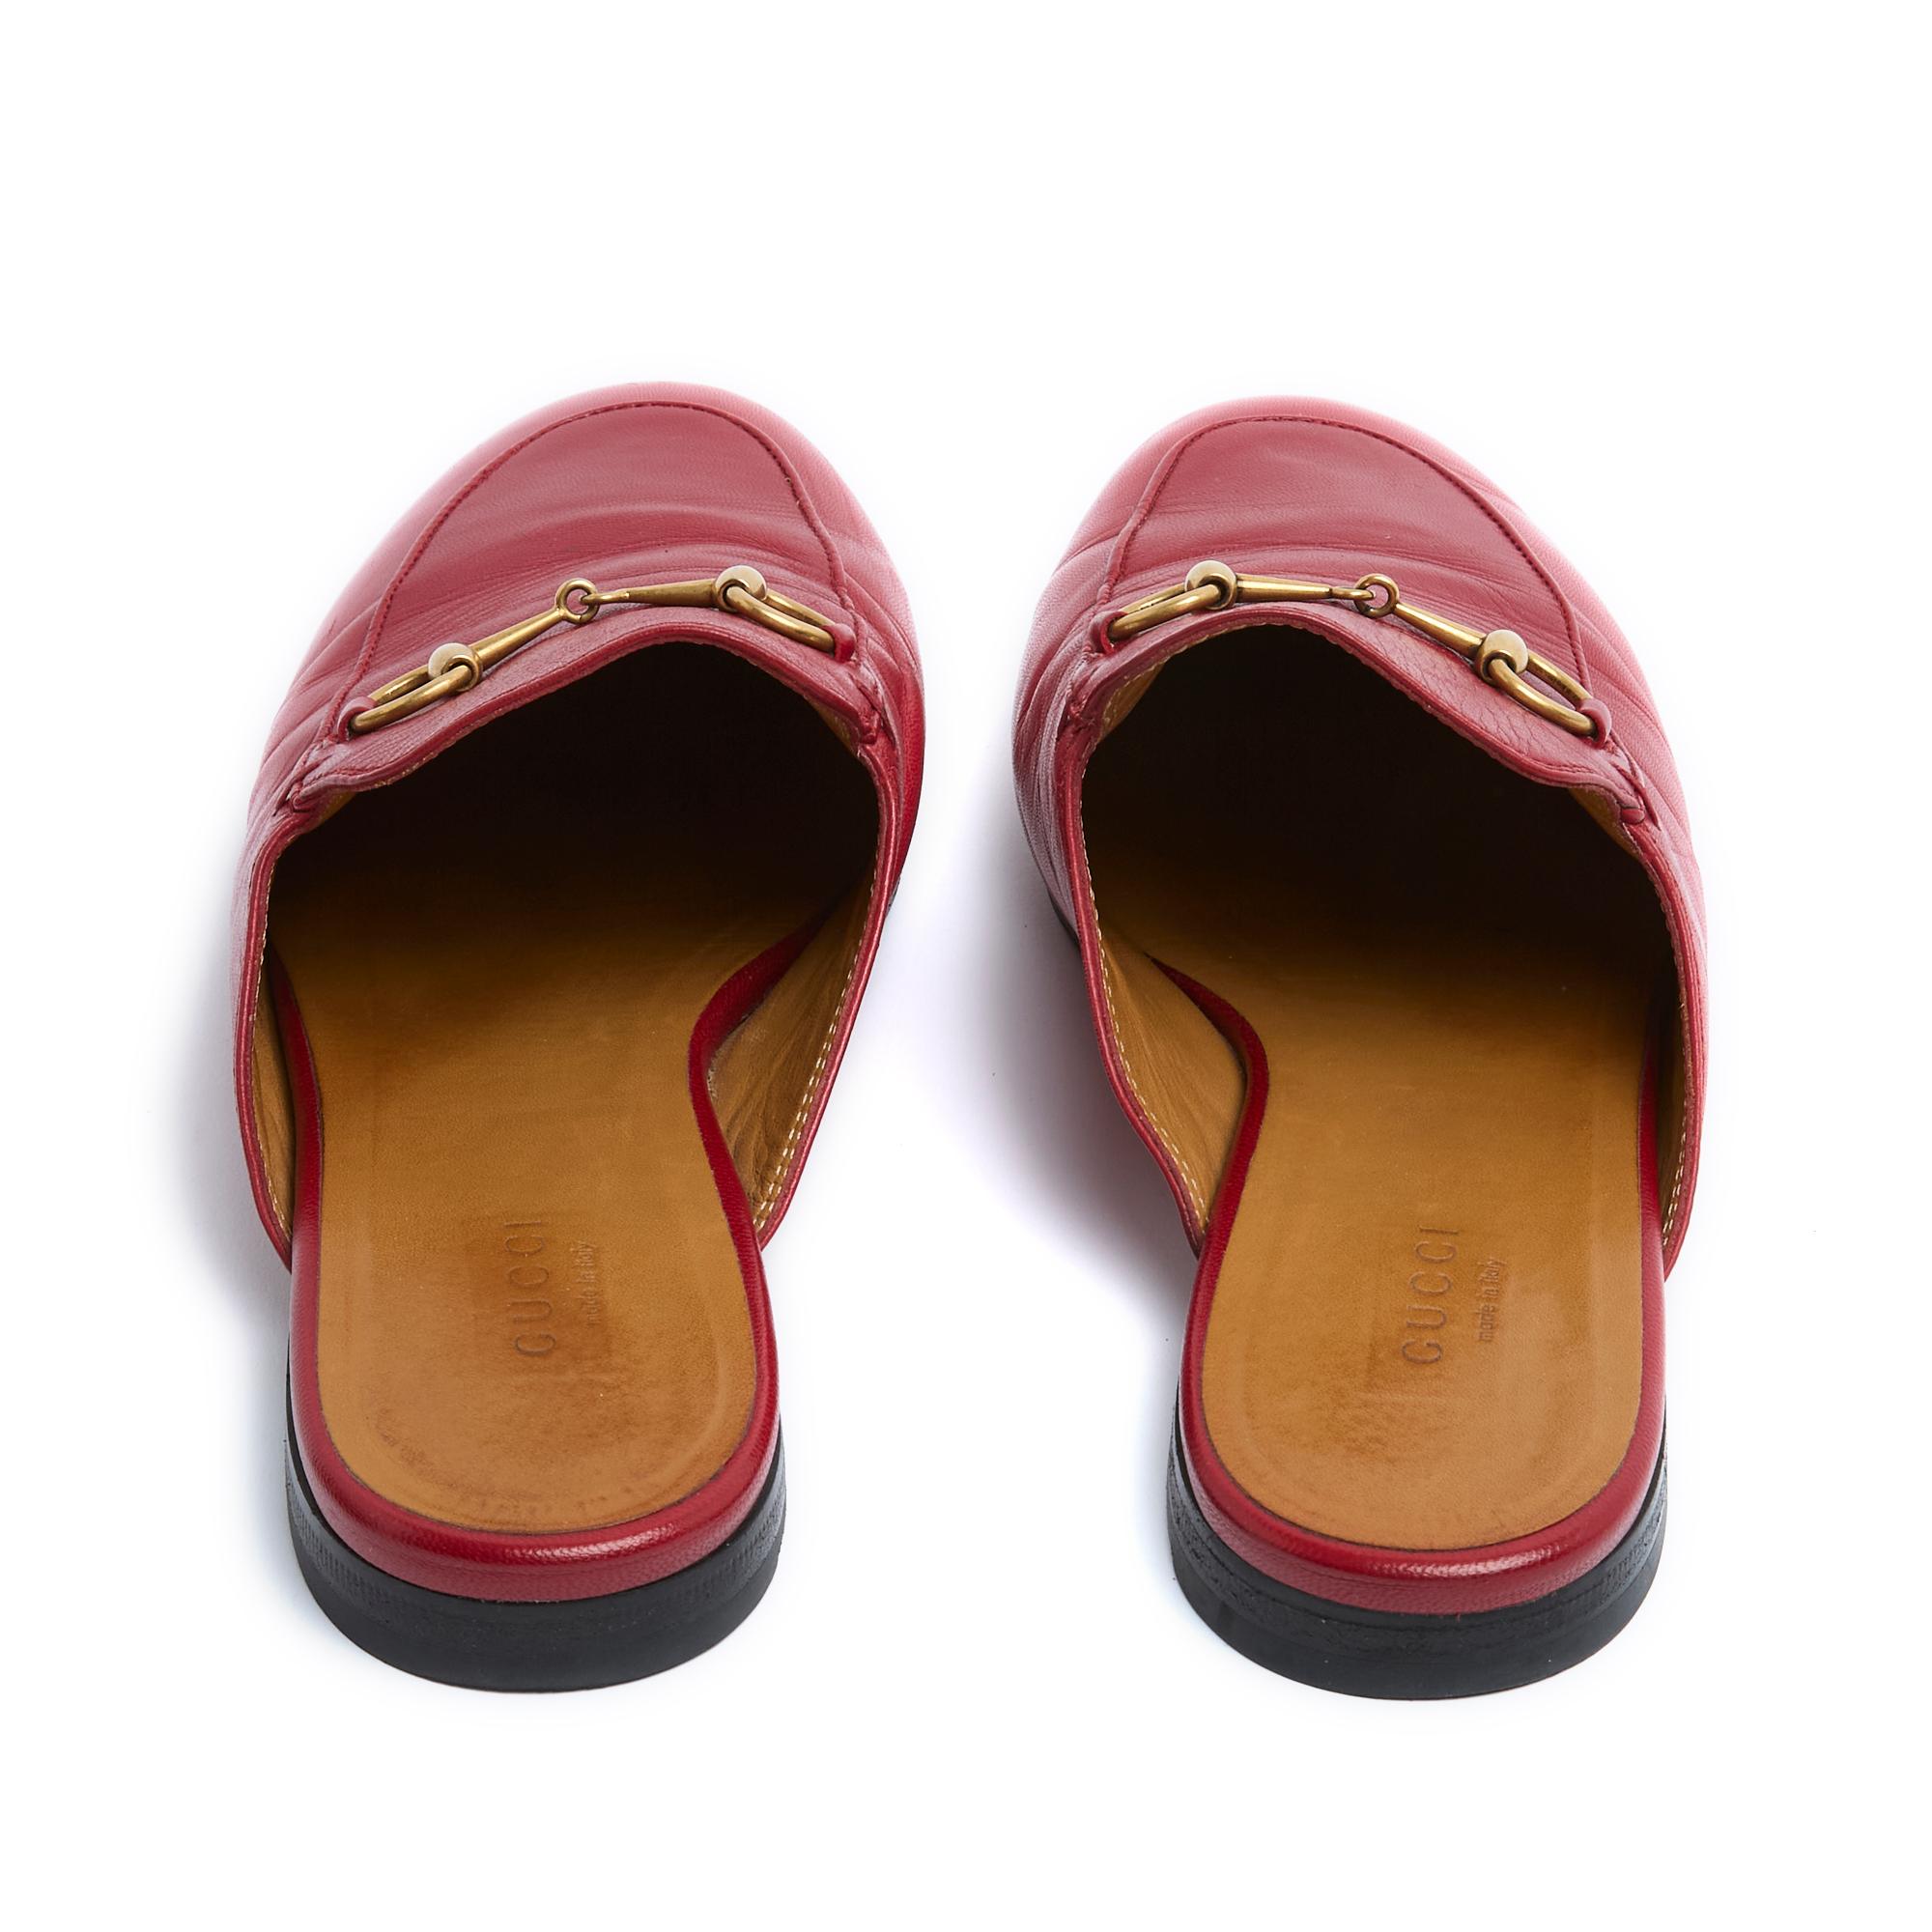 Women's or Men's Gucci Princetown red leather Loafers Mules EU39 US8.5 For Sale